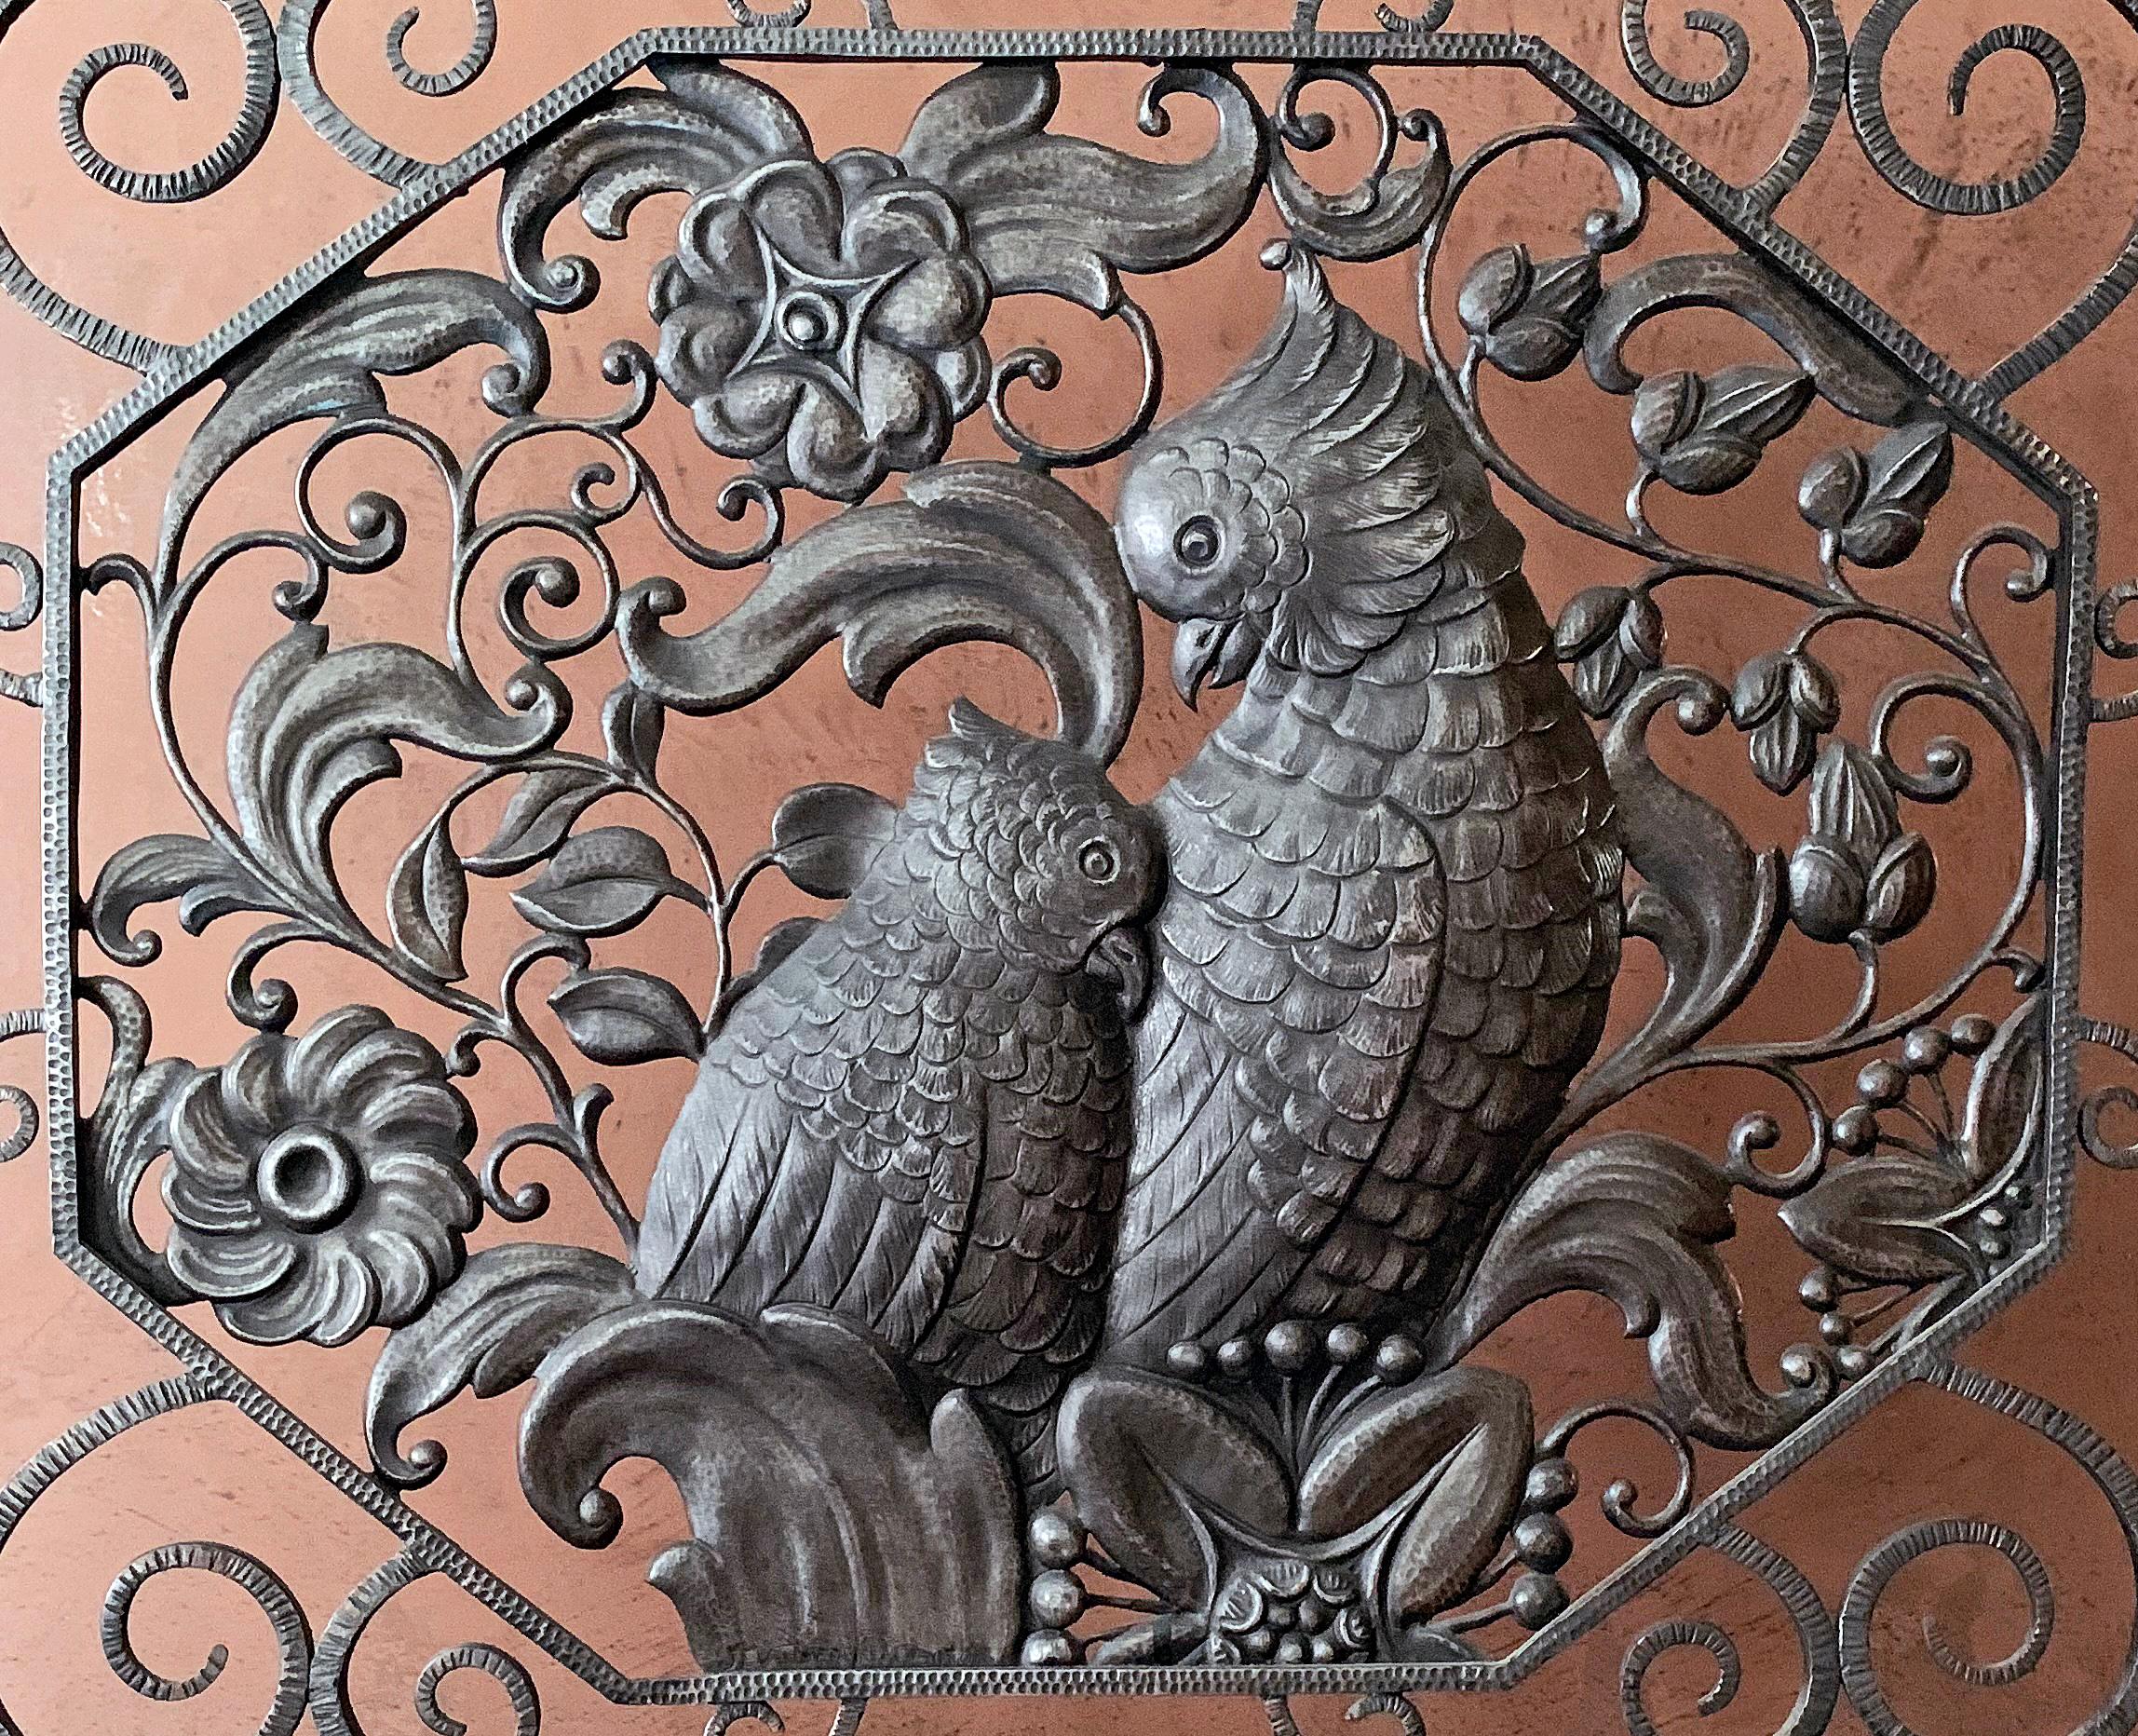 Truly remarkable, this high style Art Deco fire screen, featuring a pair of cockatoos surrounded by a dense pattern of foliate and floral motifs, framed by Art Deco tendrils and curves is an extraordinary piece of wrought iron artisanry. The artist